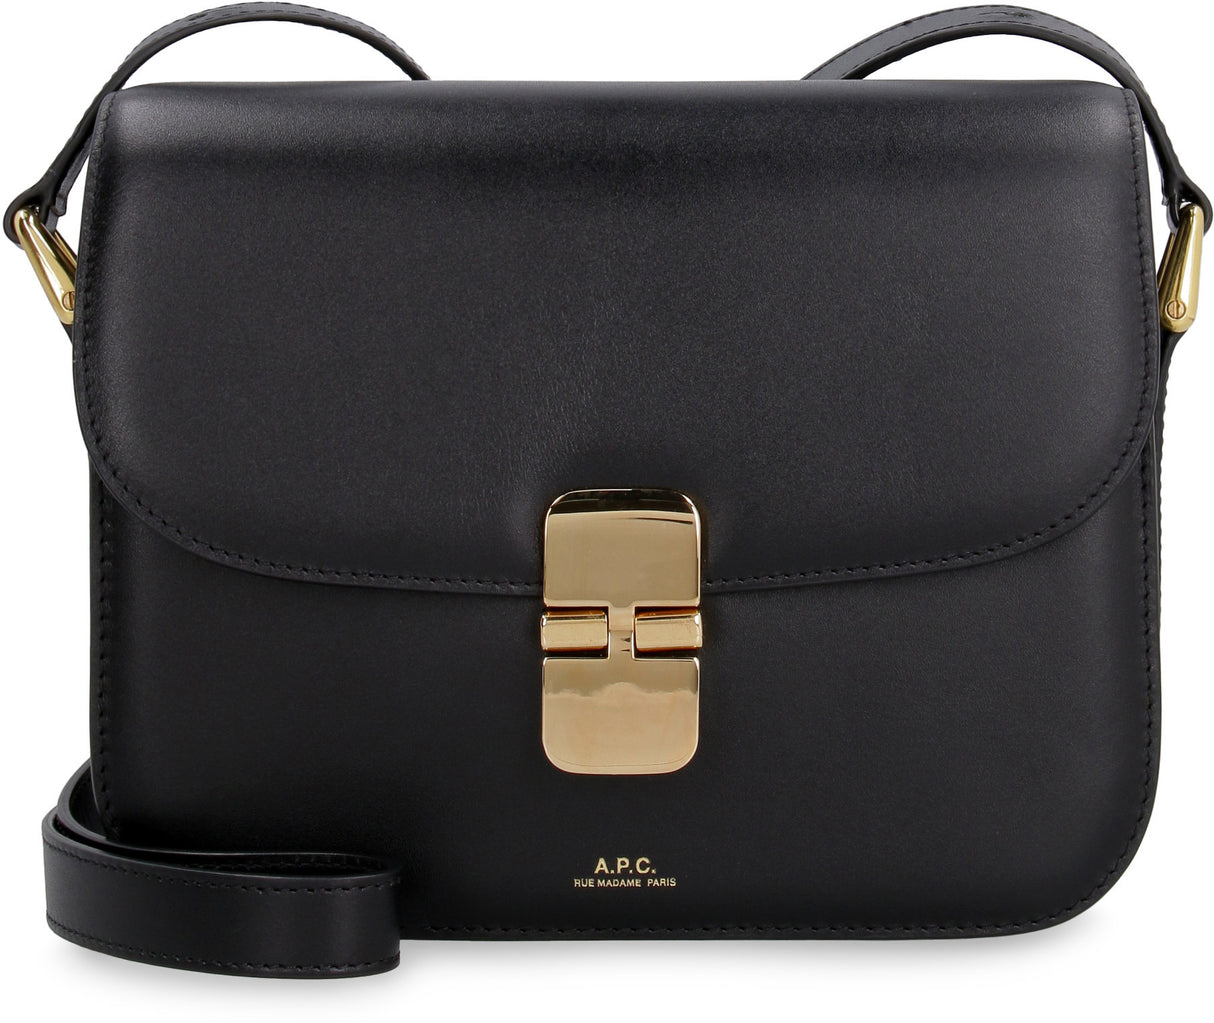 A.P.C. Black Smooth Leather Crossbody Bag for Women